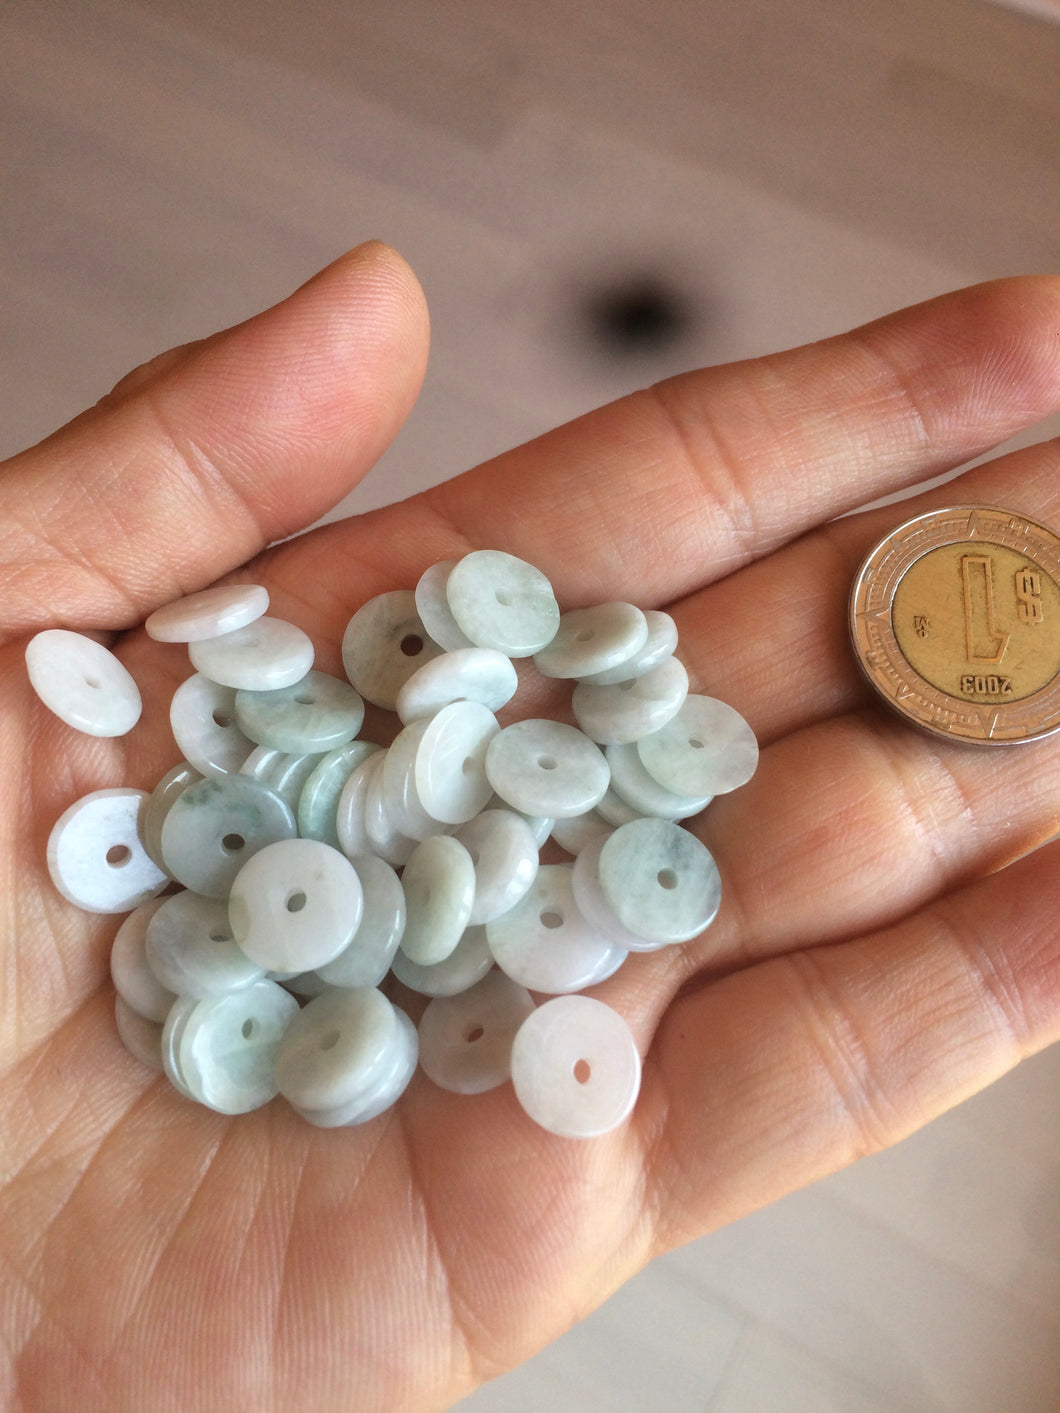 50 pieces of 100% Natural light green/white Jadeite Jade small safety button beads AS79 (supply)